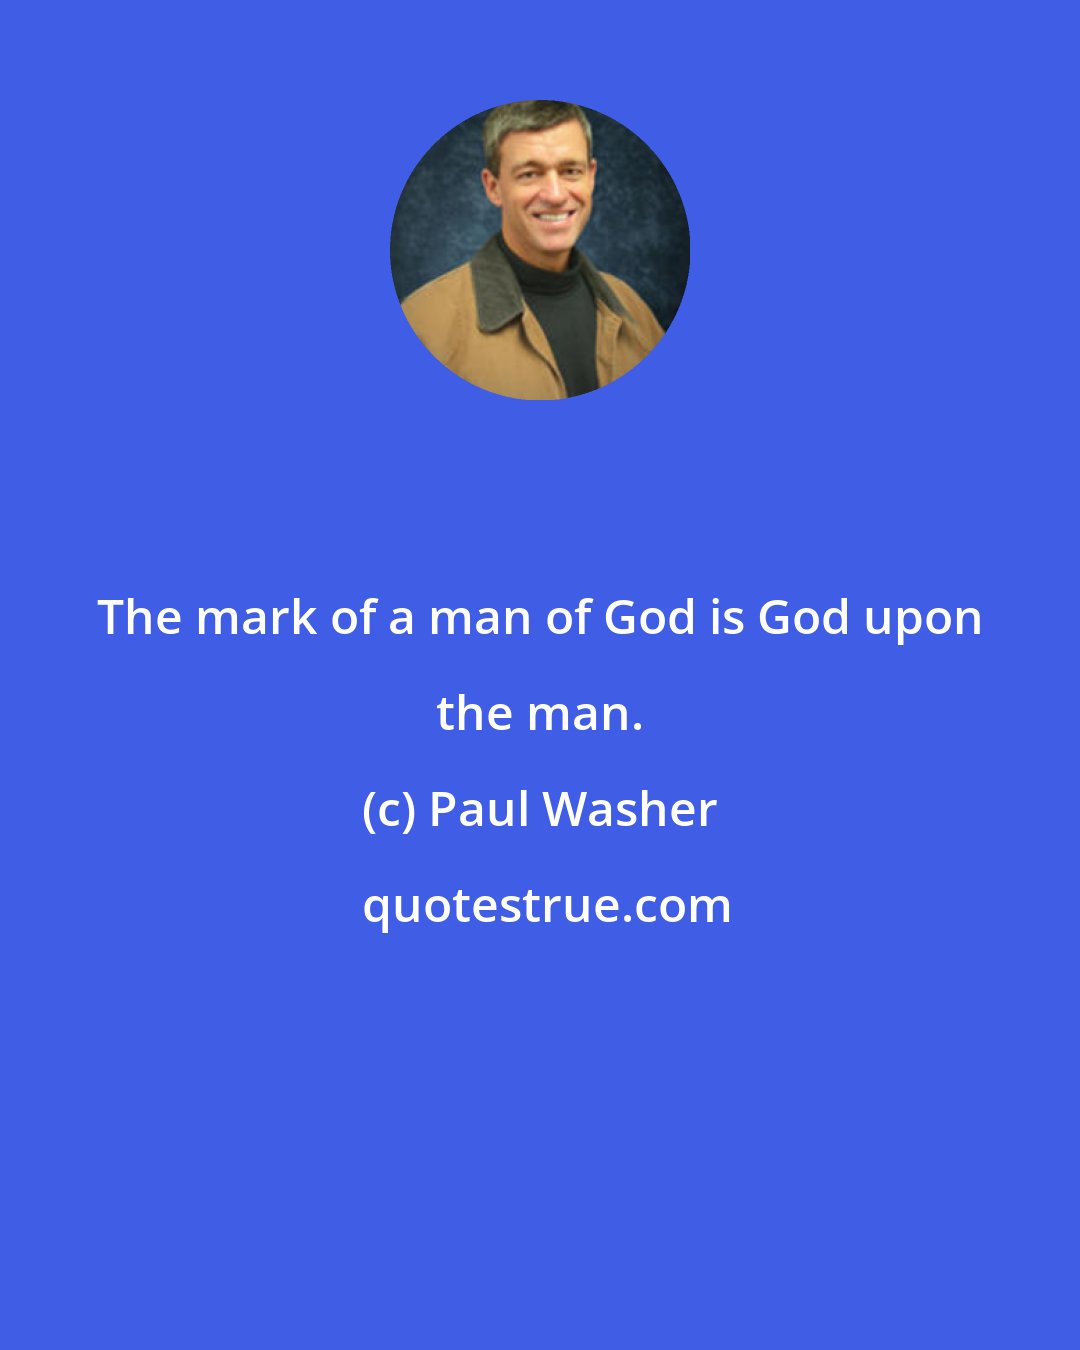 Paul Washer: The mark of a man of God is God upon the man.